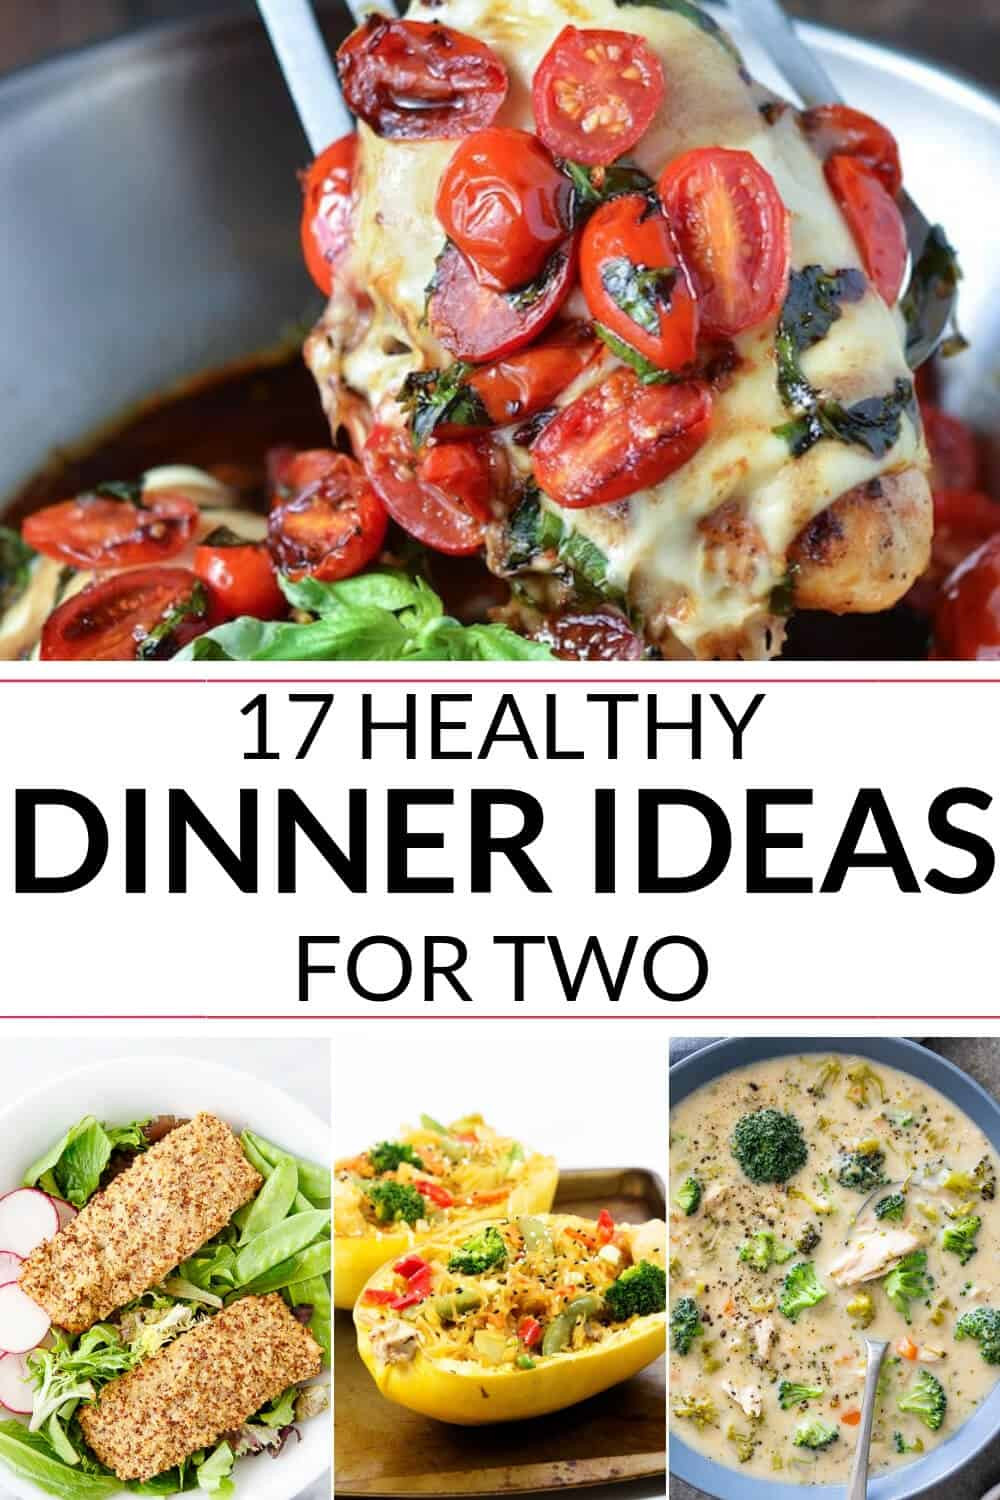 35 Best Pinterest Dinner Ideas - Best Recipes Ideas and Collections